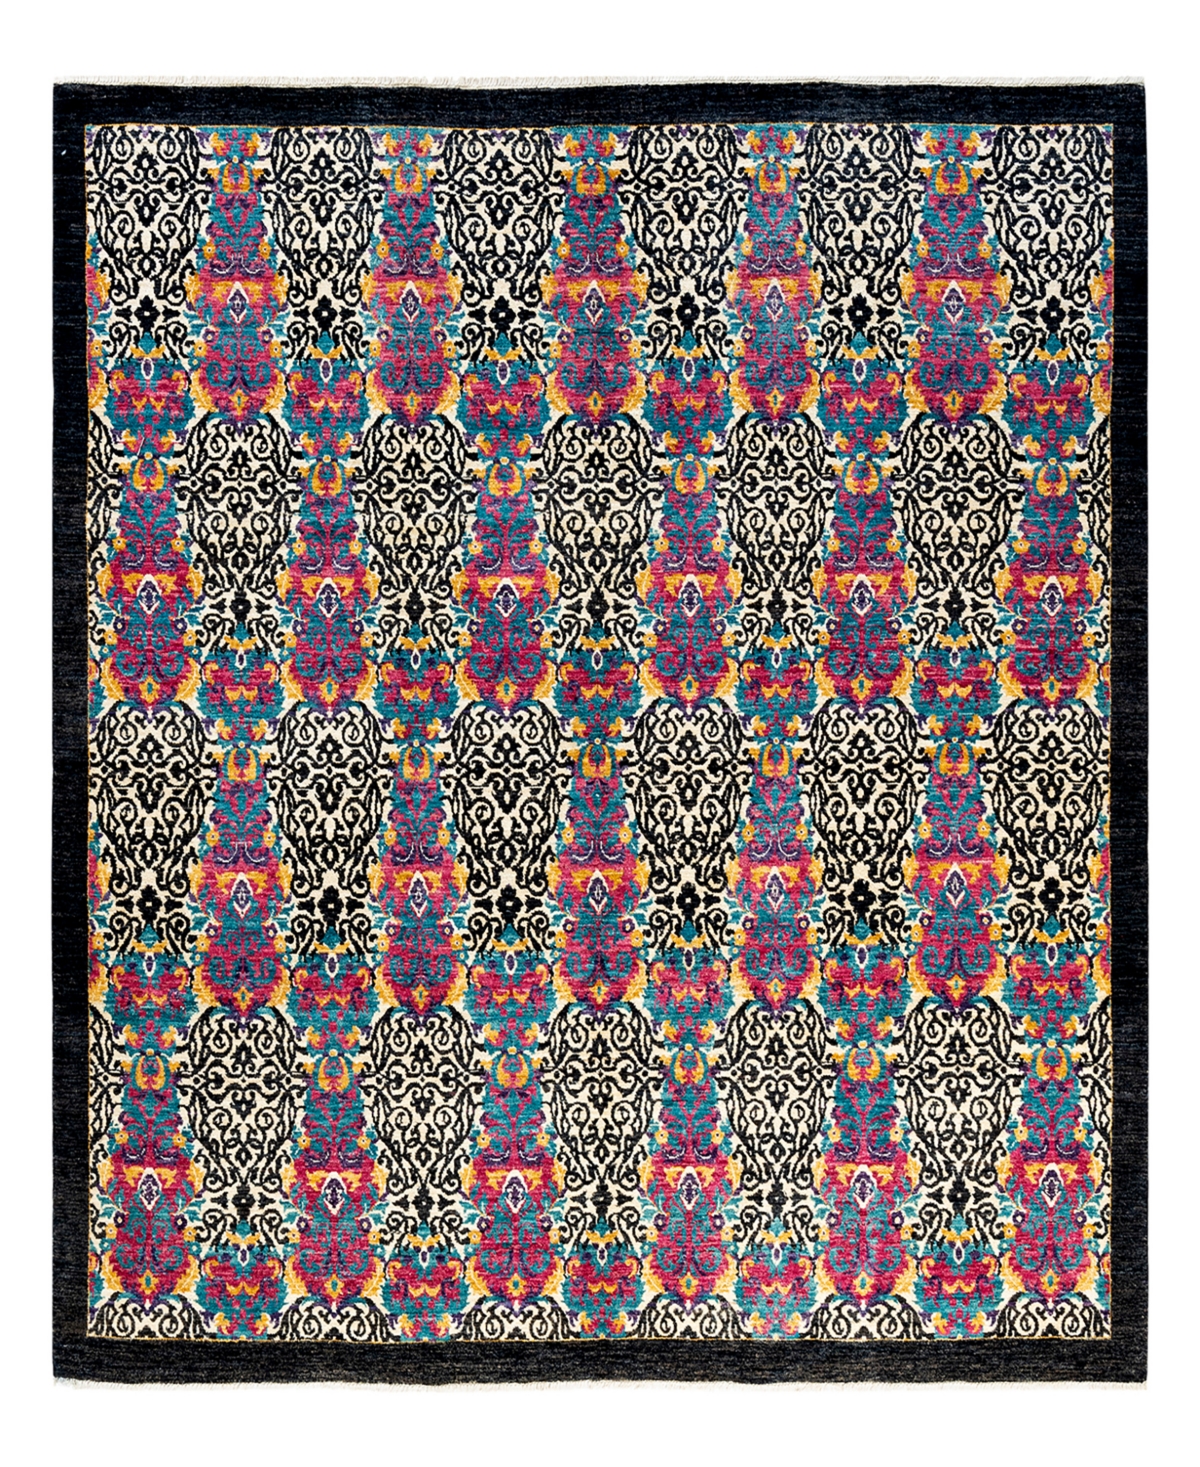 Adorn Hand Woven Rugs Suzani M1675 7'10in x 8'5in Square Area Rug - Black